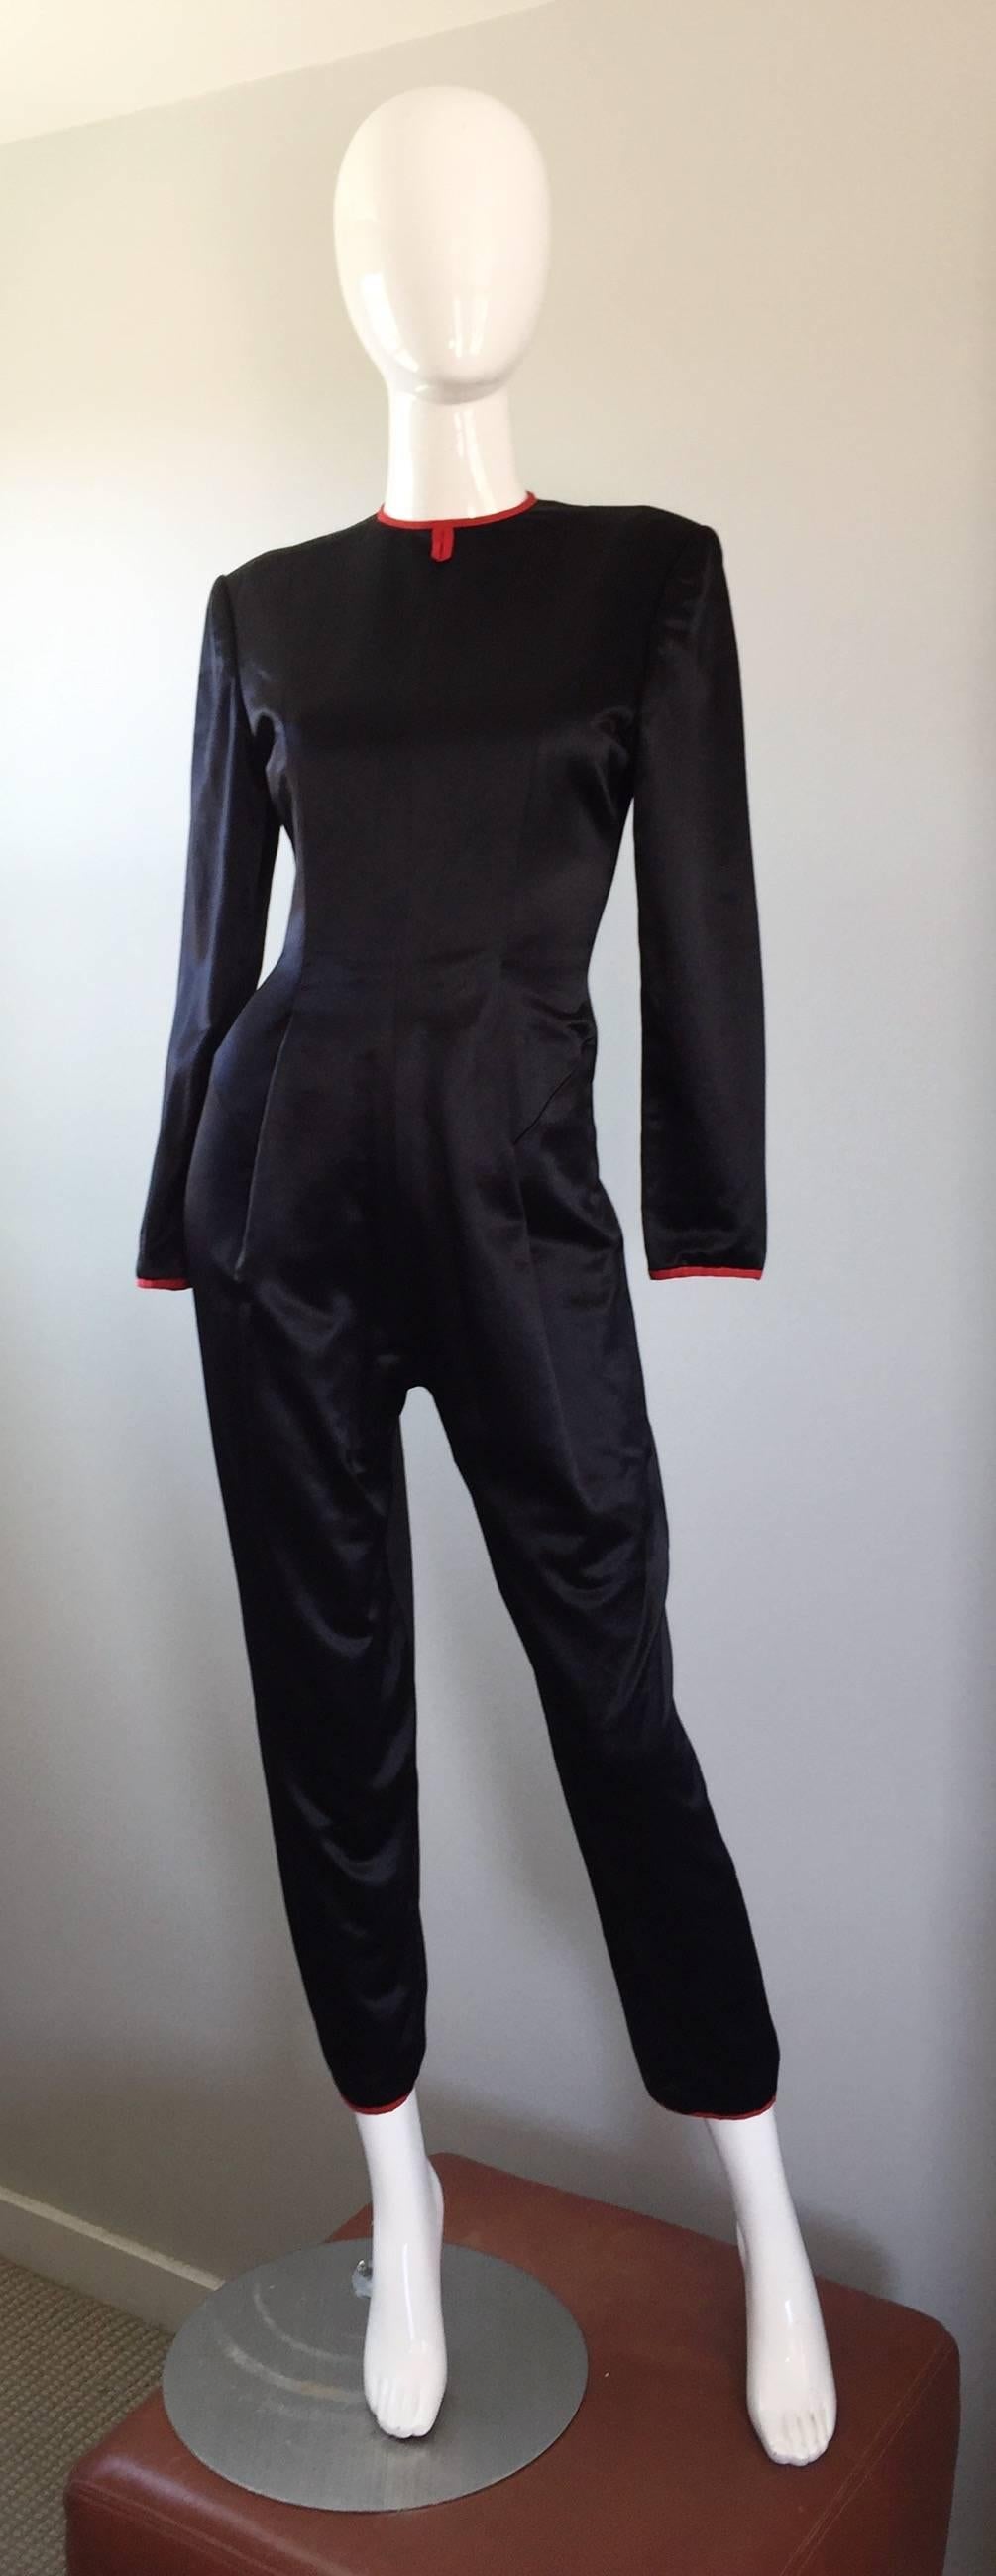 Amazing and rare vintage GEOFFREY BEENE black silk satin jumpsuit / catsuit! Wonderful tailored fit one would expect from the brilliant Beene! Looks great alone or belted. Red satin trim at the collar, sleeve cuffs and hems of the ankles. Hidden